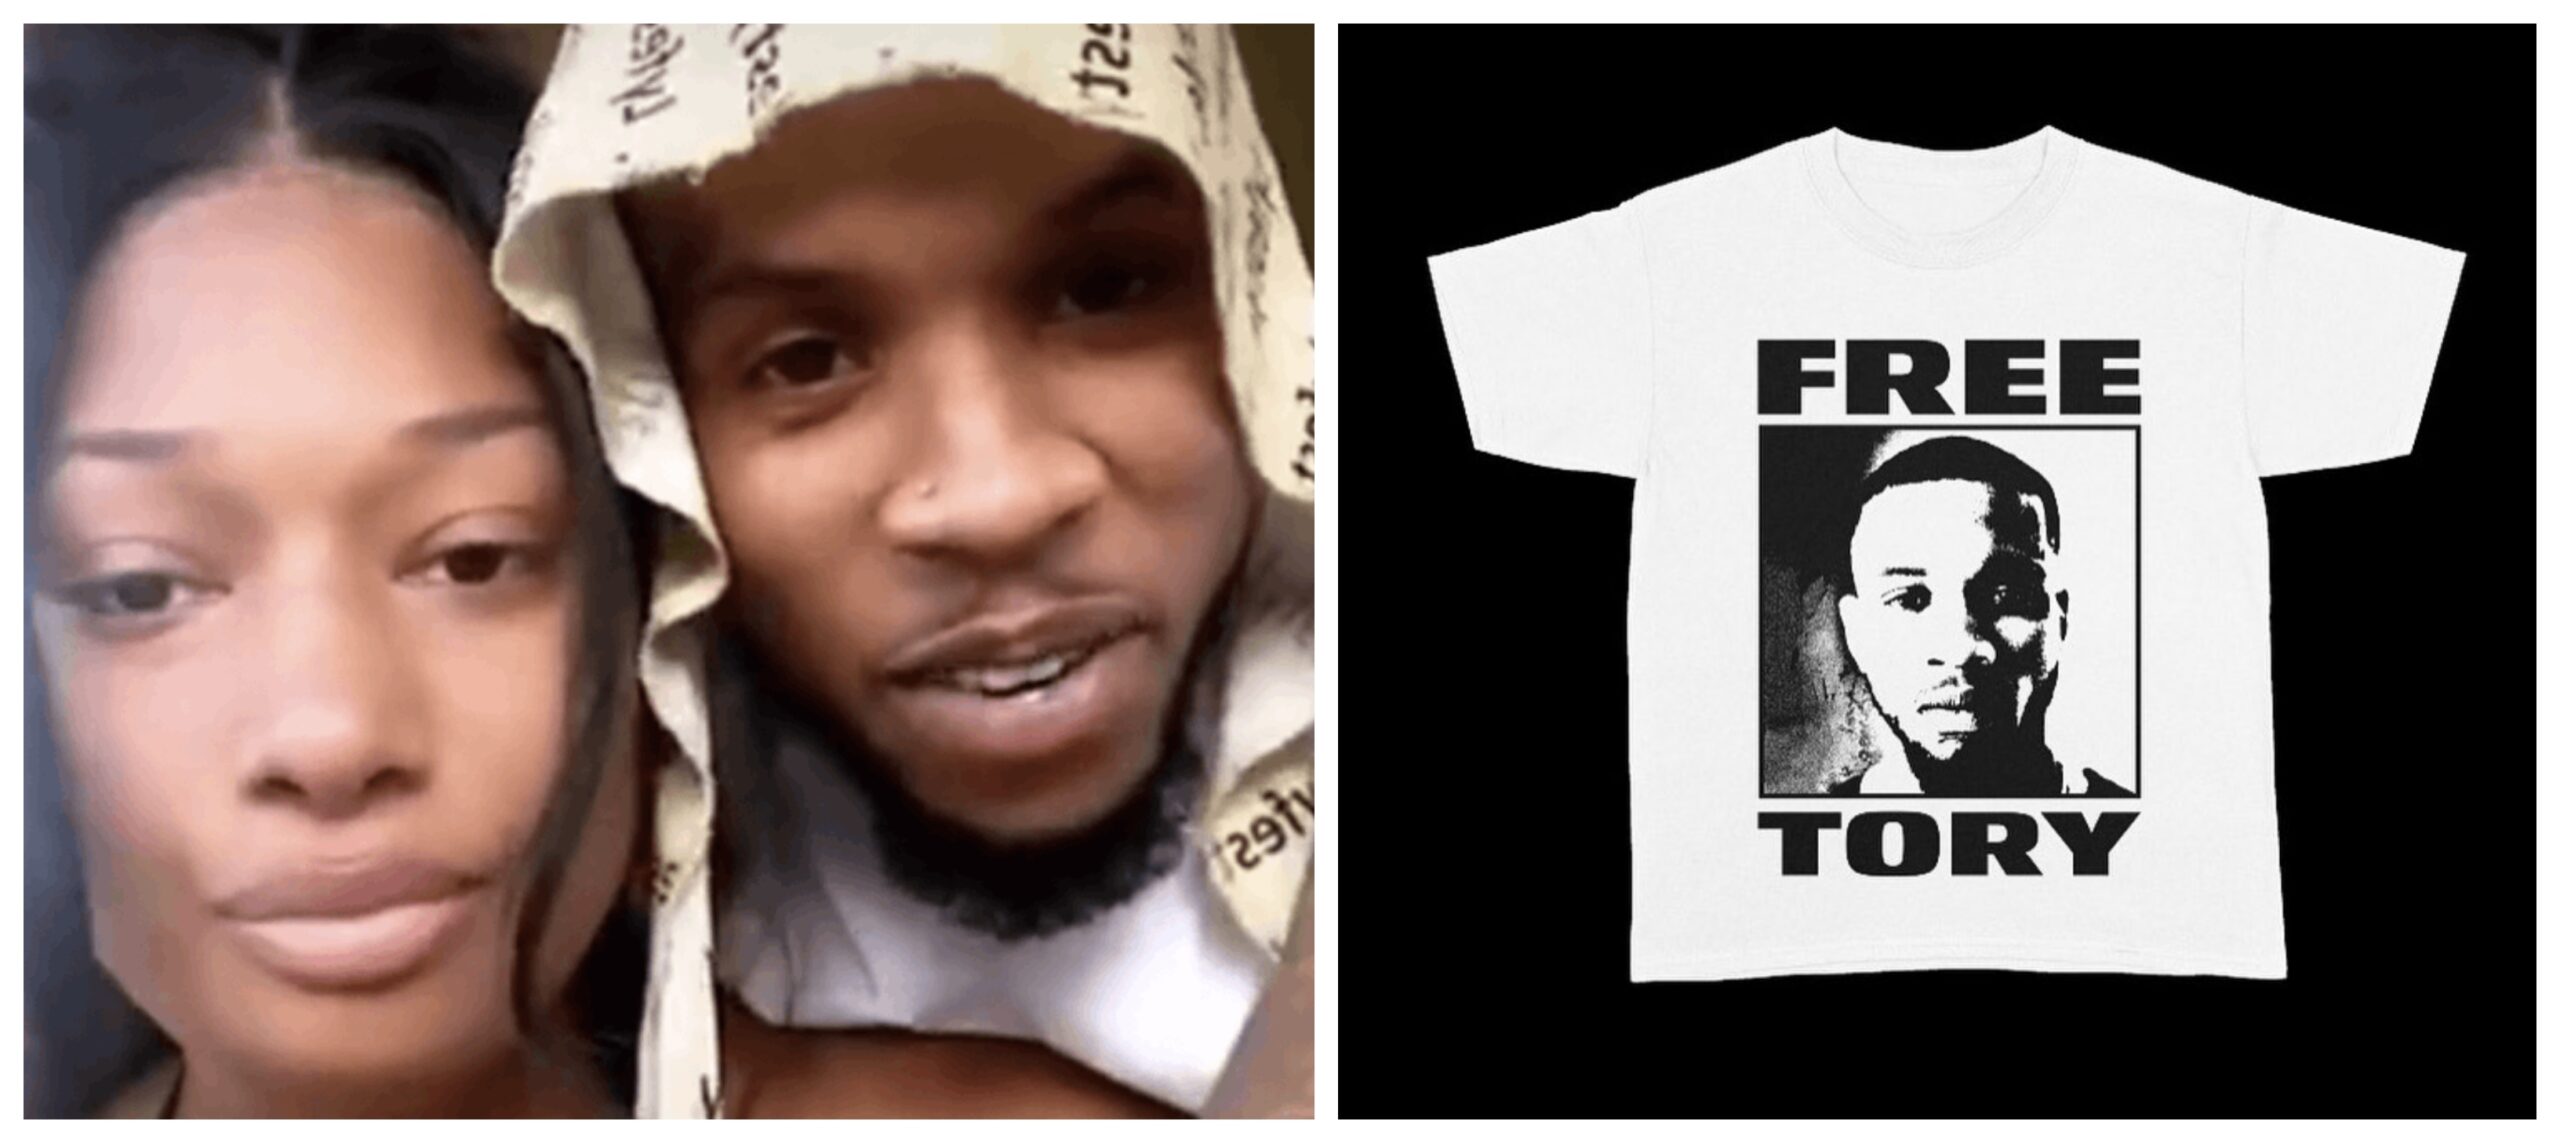 Tory Lanez Starts Selling “Free Tory” T-Shirts After Being Hit With 10-Year Prison Sentence